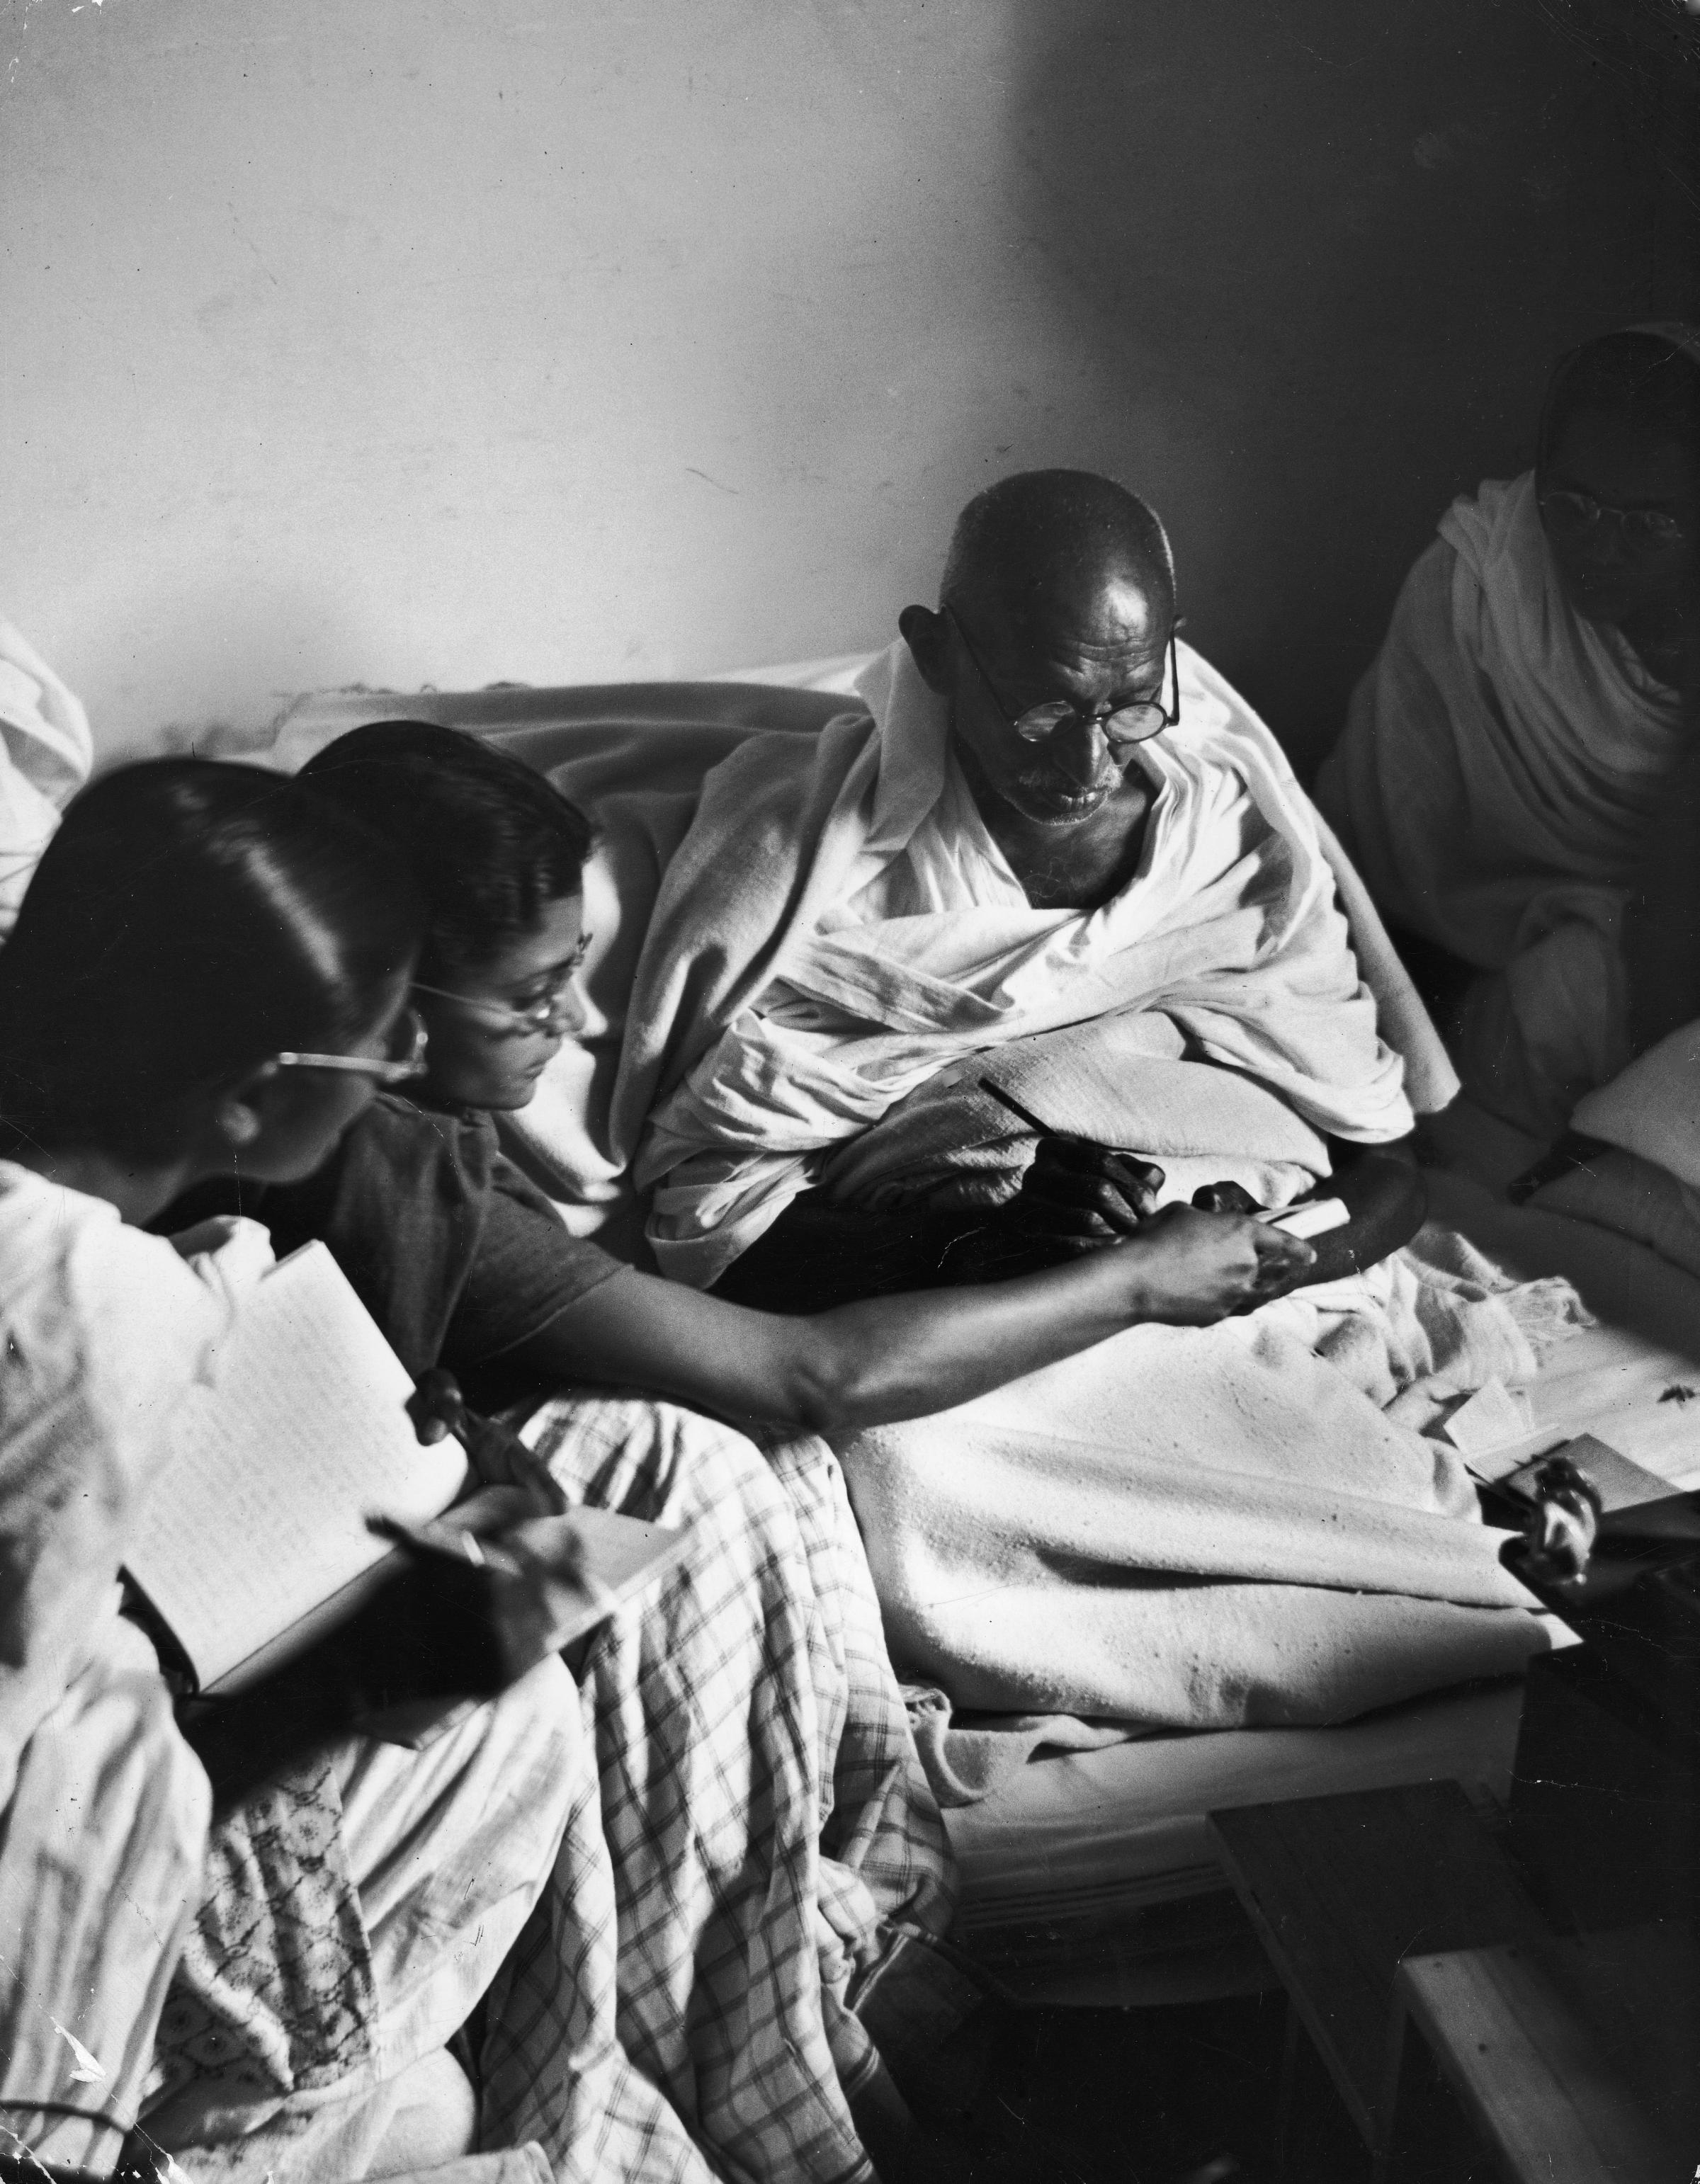 Gandhi ends his final fast in 1948